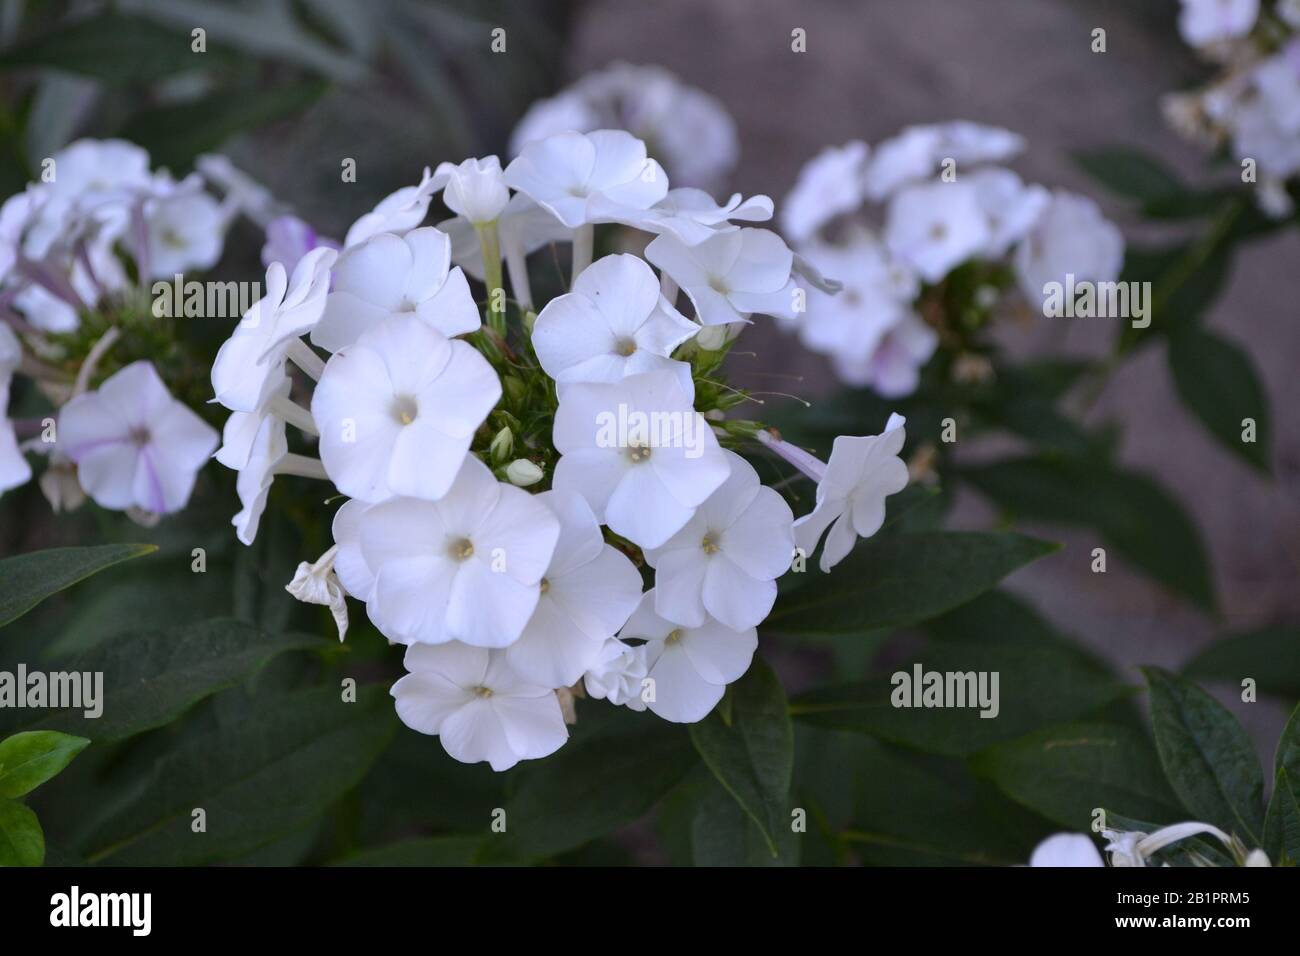 Phlox. Polemoniaceae. Growing flowers. Flowerbed. Garden. Floriculture. White inflorescences. Beautiful flowers. Green leaves. High bushes. Summer. Ho Stock Photo